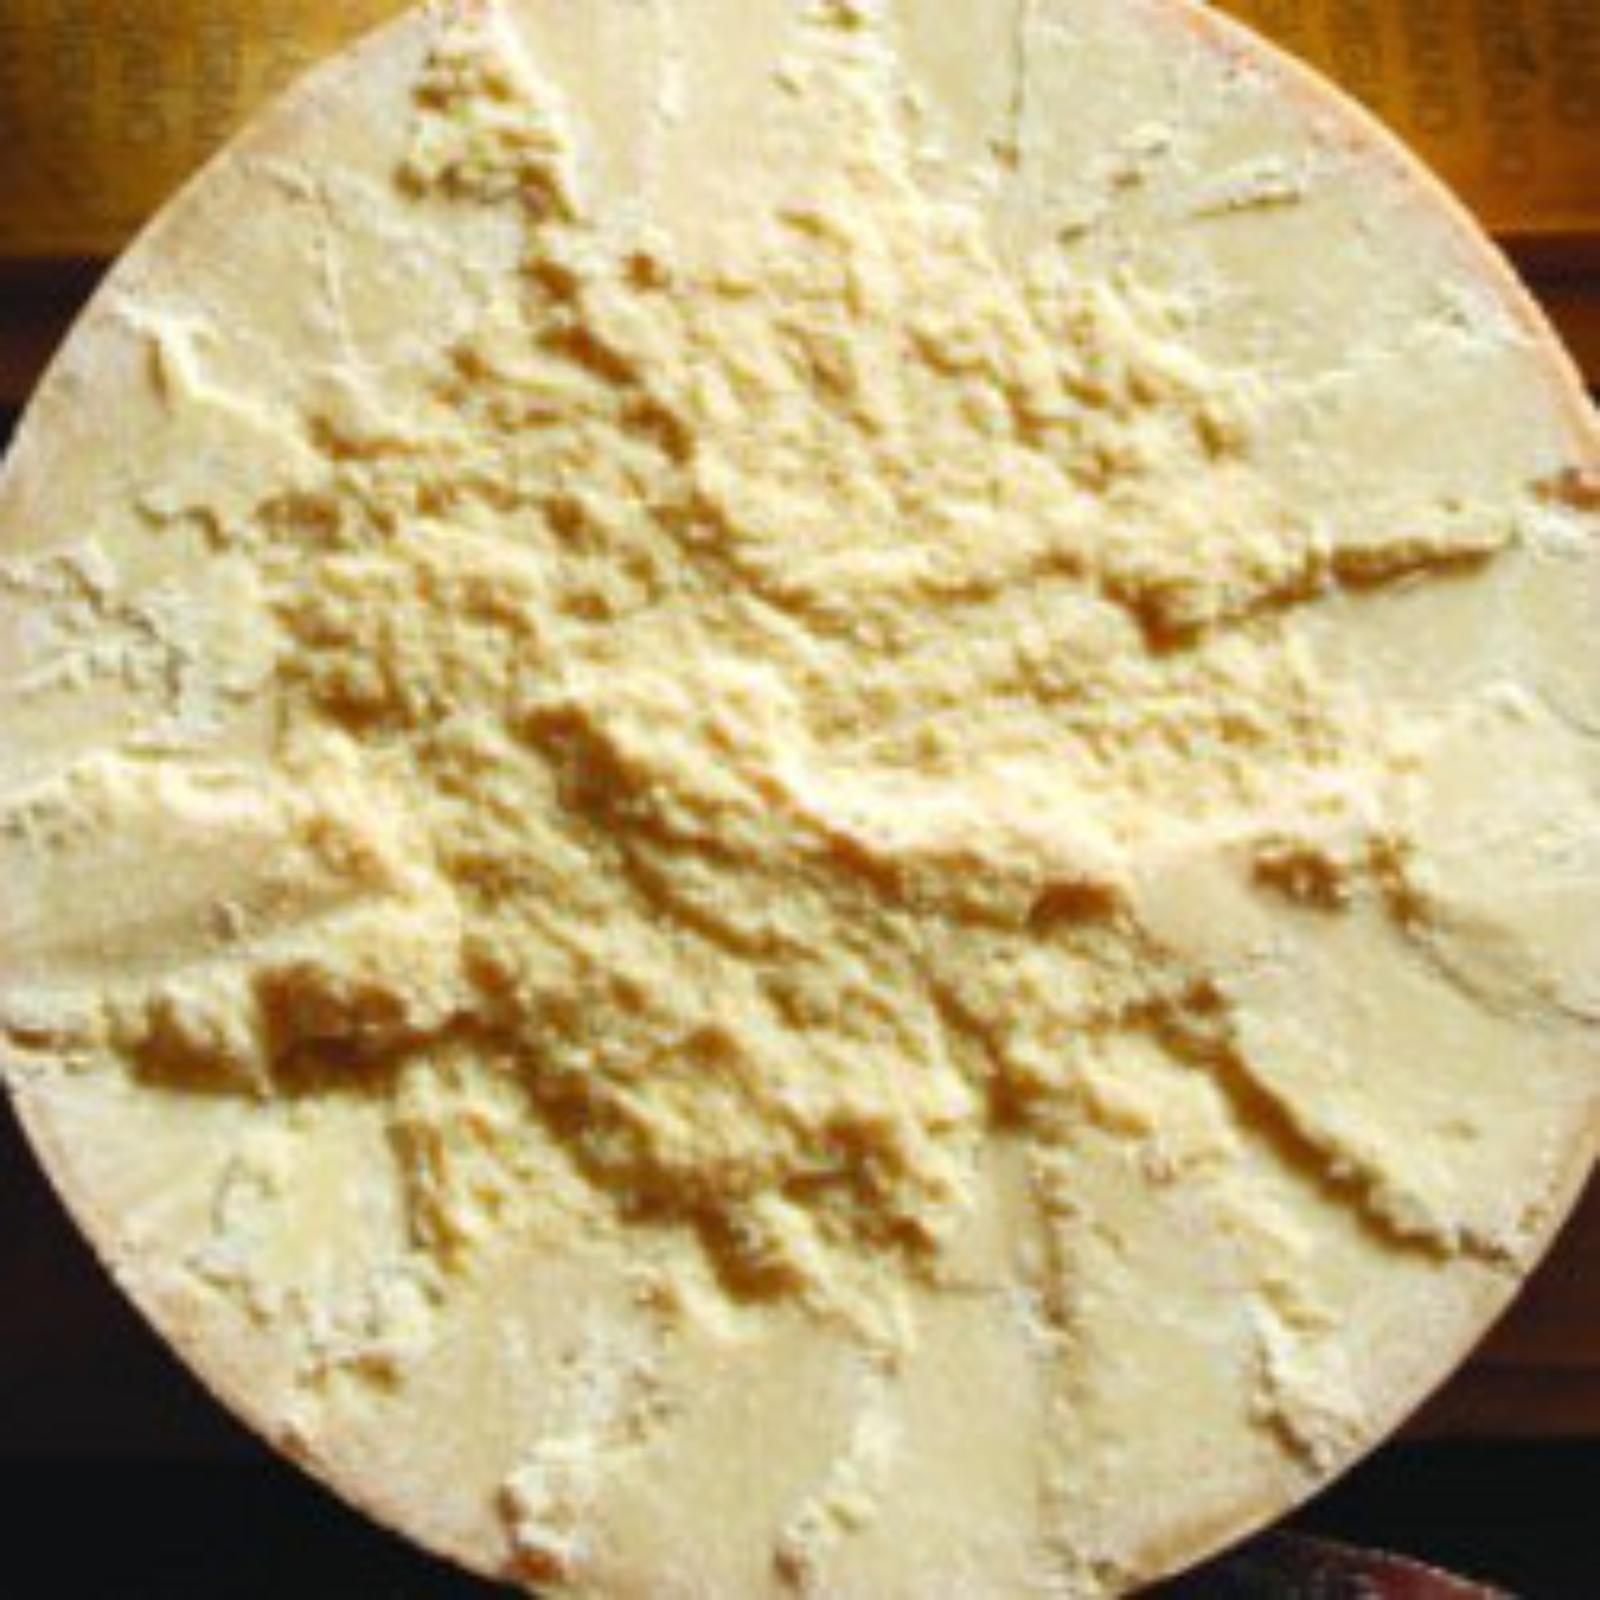 Parmigiano-Reggiano producer and cheese-making